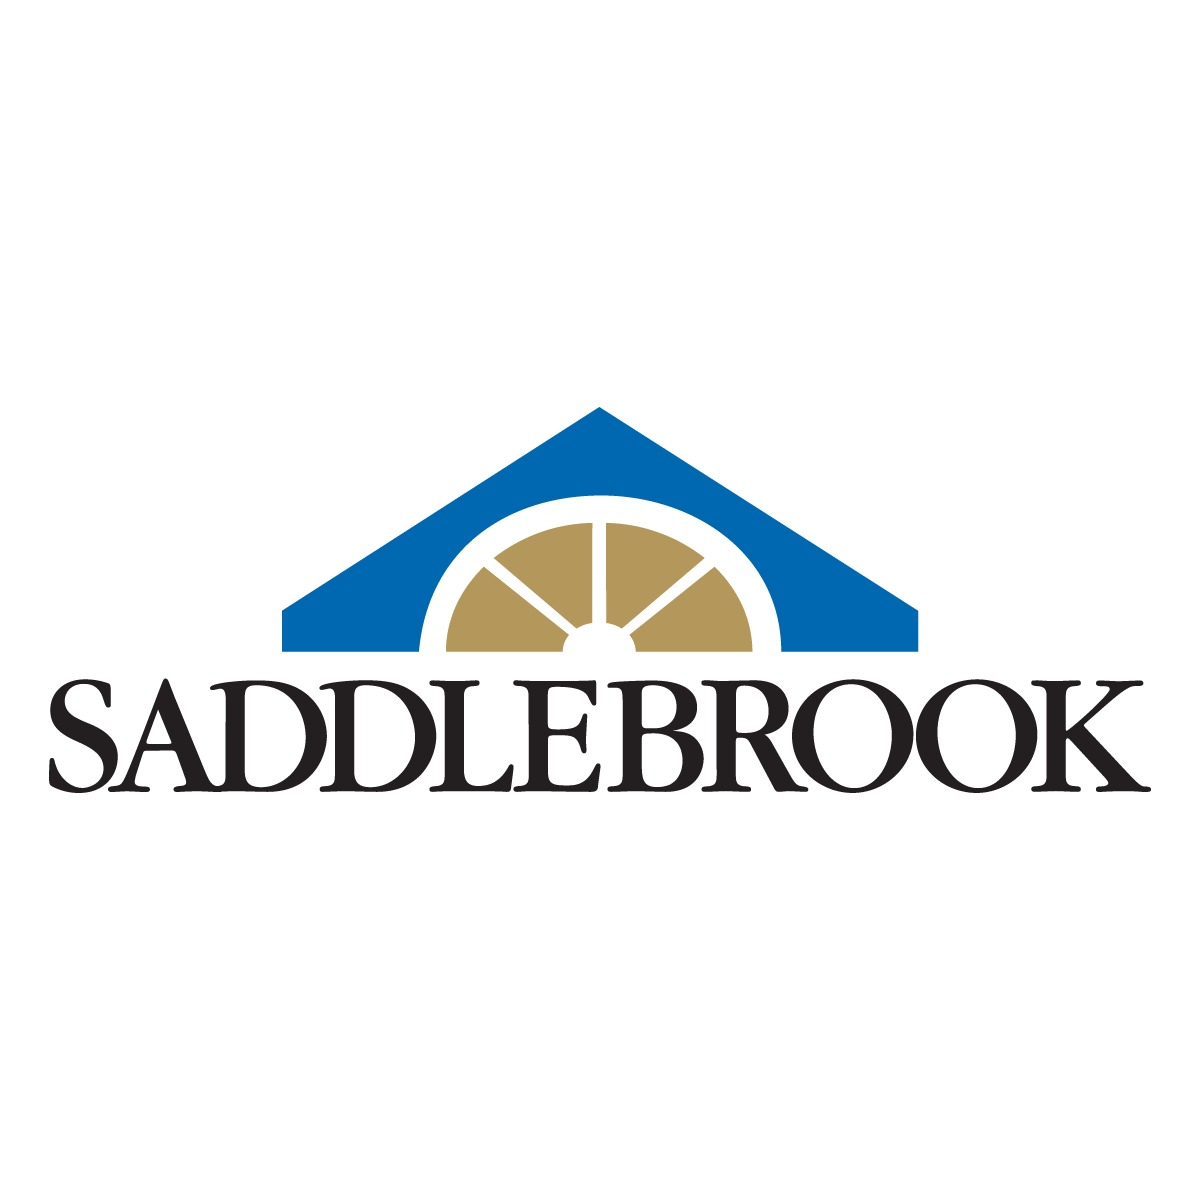 Saddlebrook Properties - Knoxville, TN 37922 - (865)966-8700 | ShowMeLocal.com